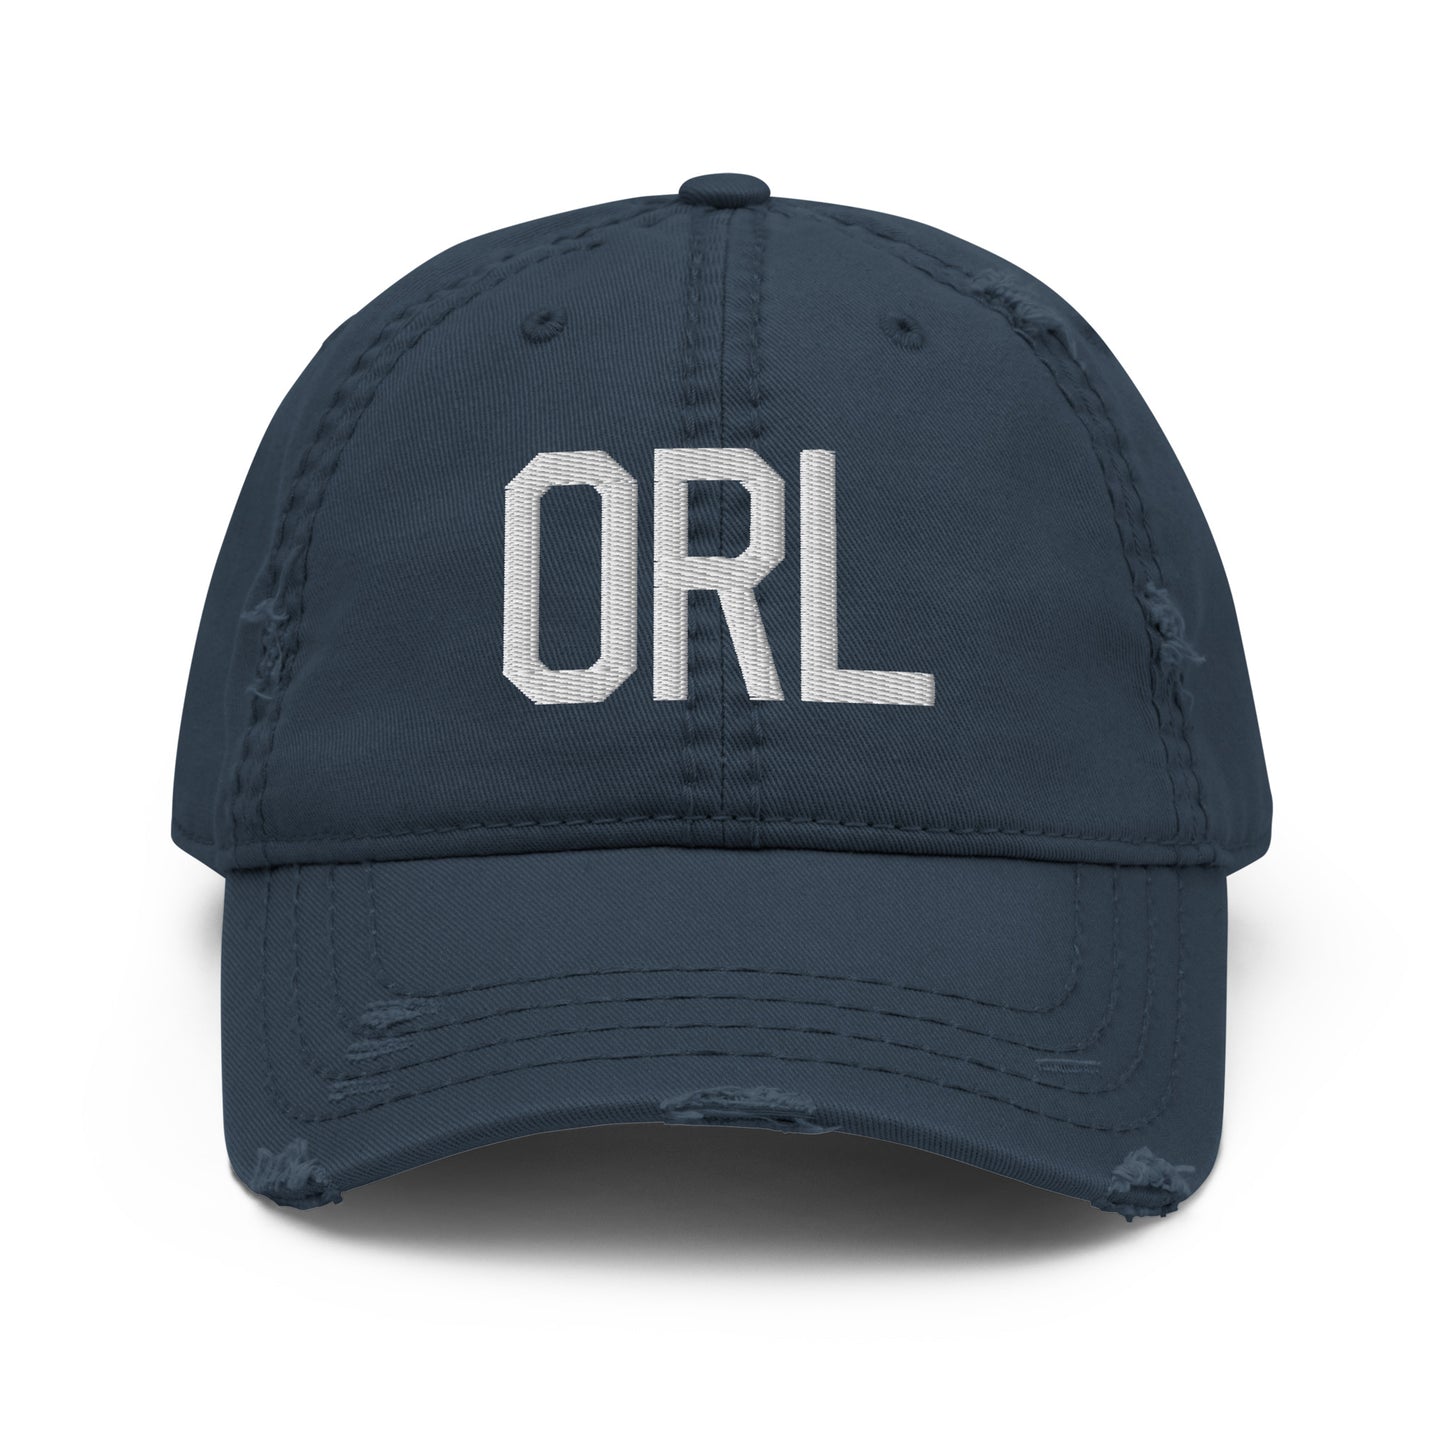 Airport Code Distressed Hat - White • ORL Orlando • YHM Designs - Image 13